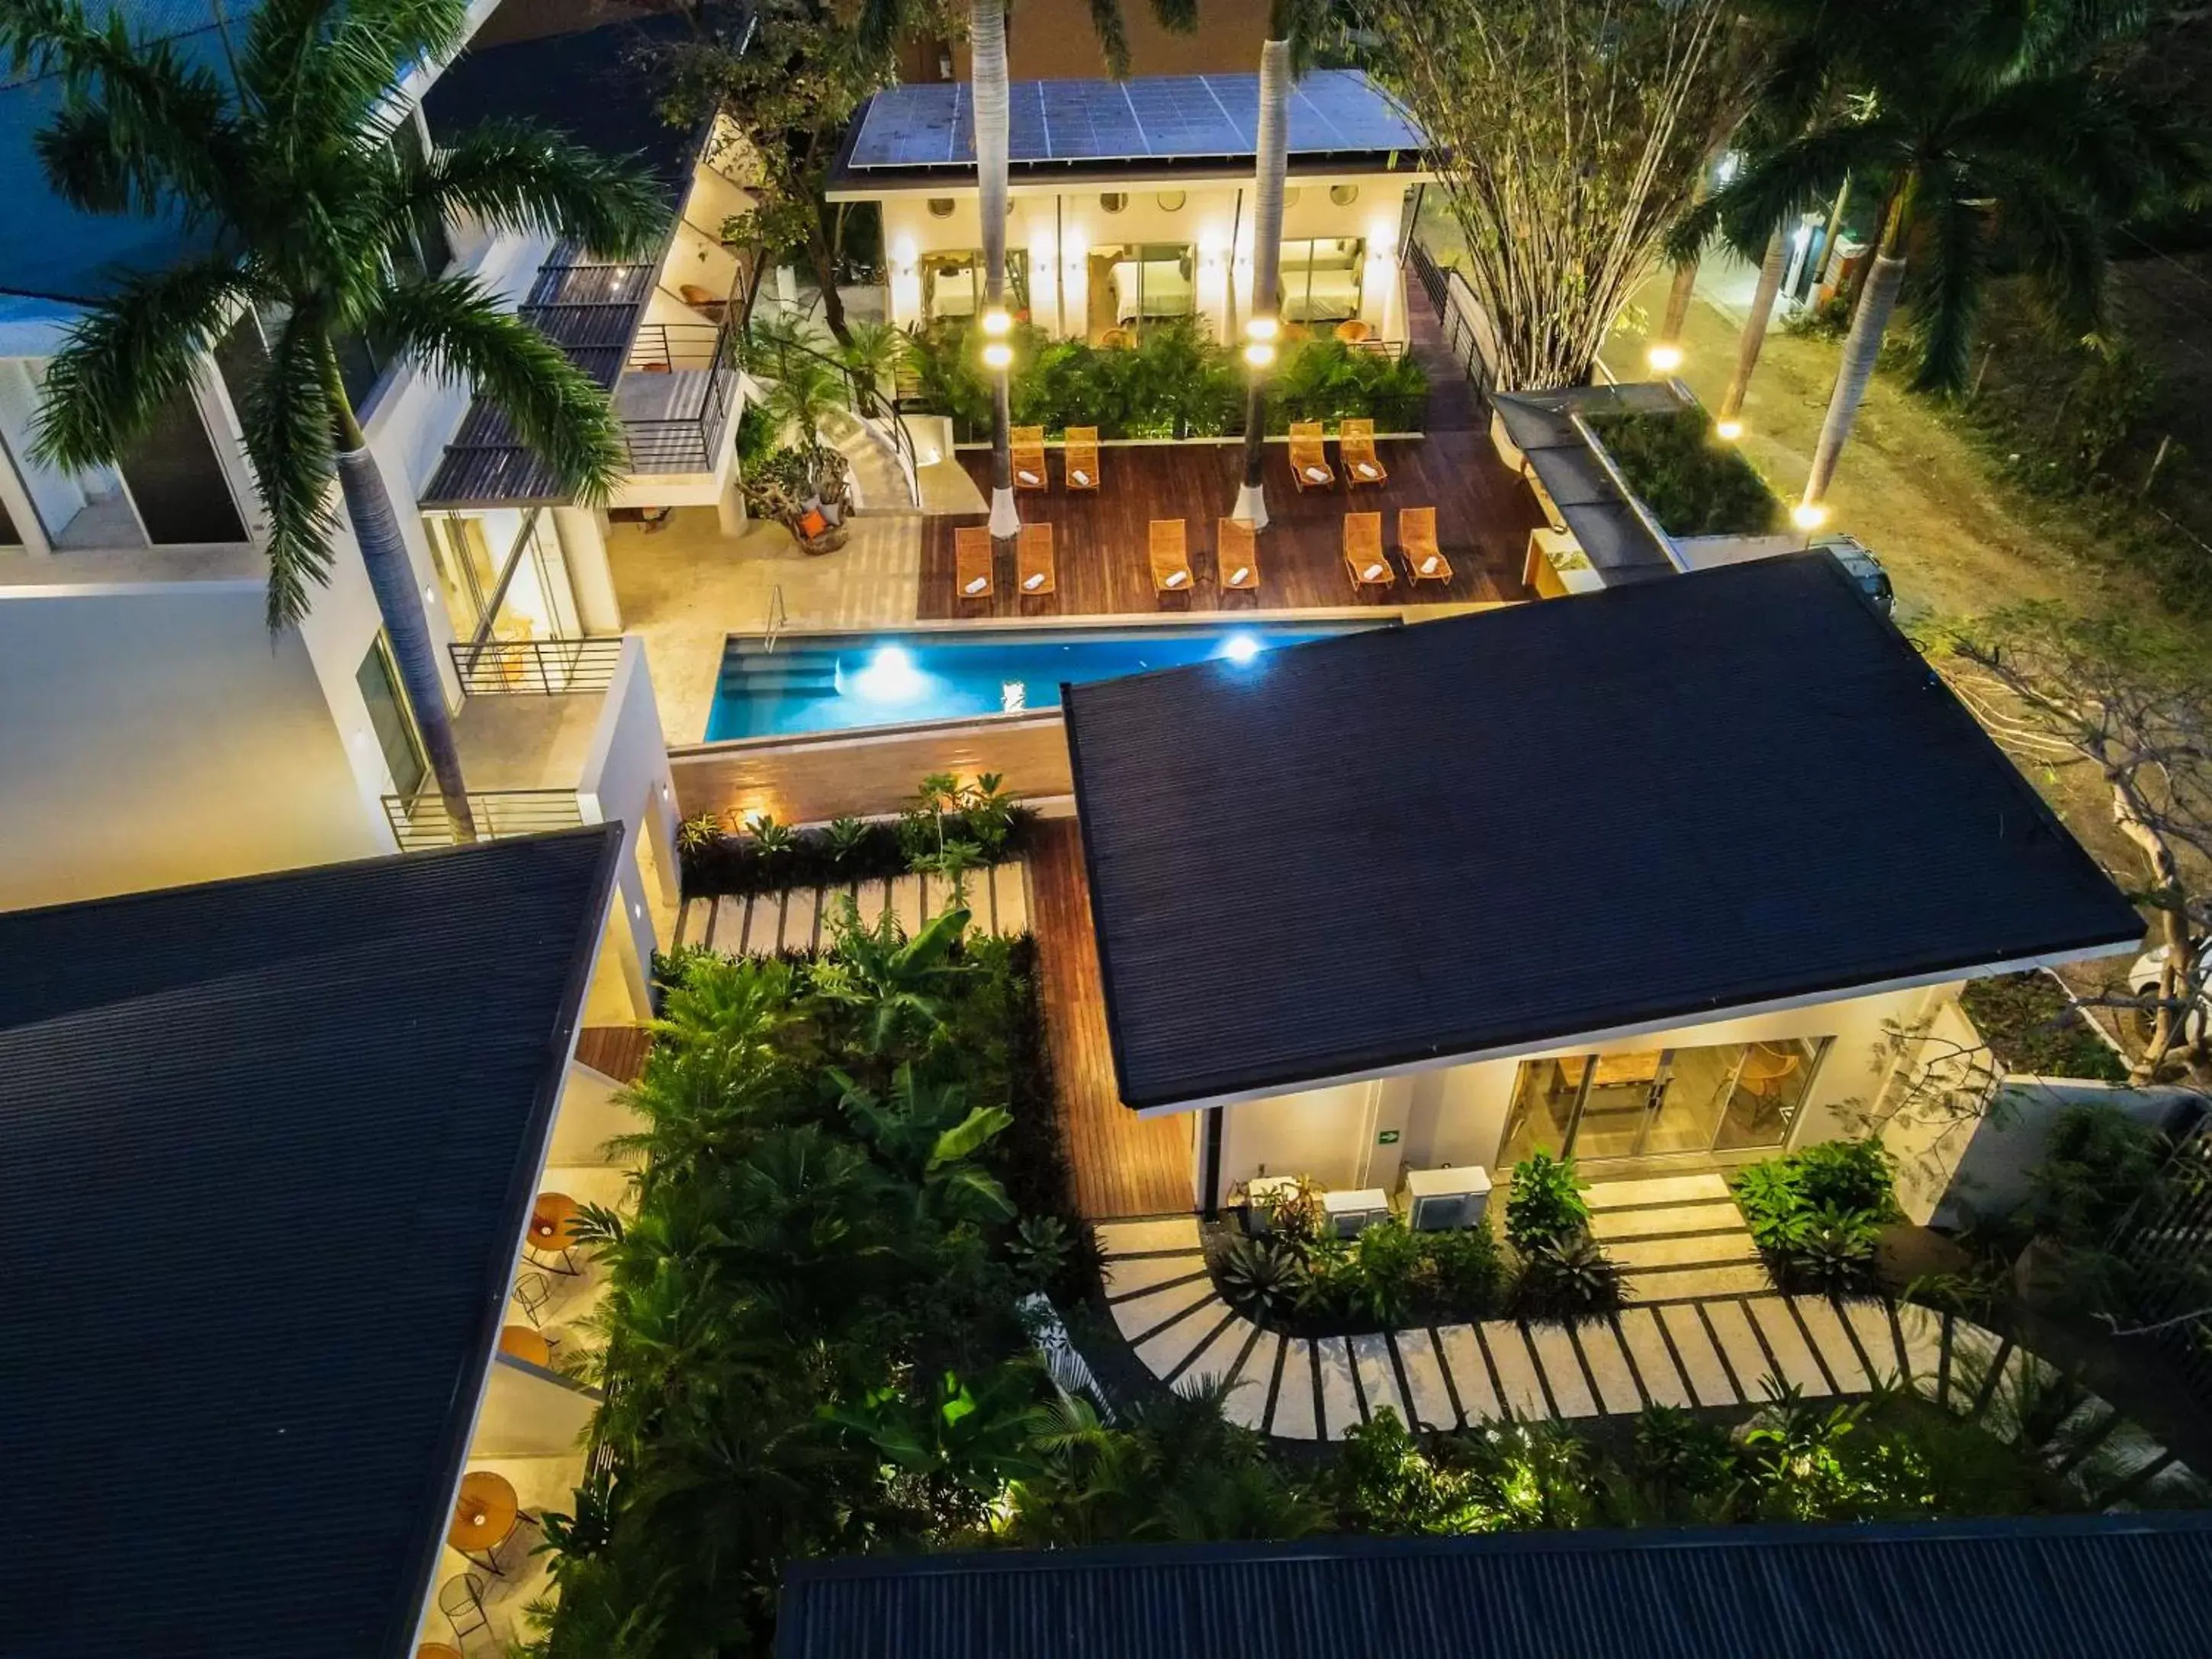 Bird's eye view, Pool View in Mother Earth Luxury Boutique Hotel, Restaurant & Spa